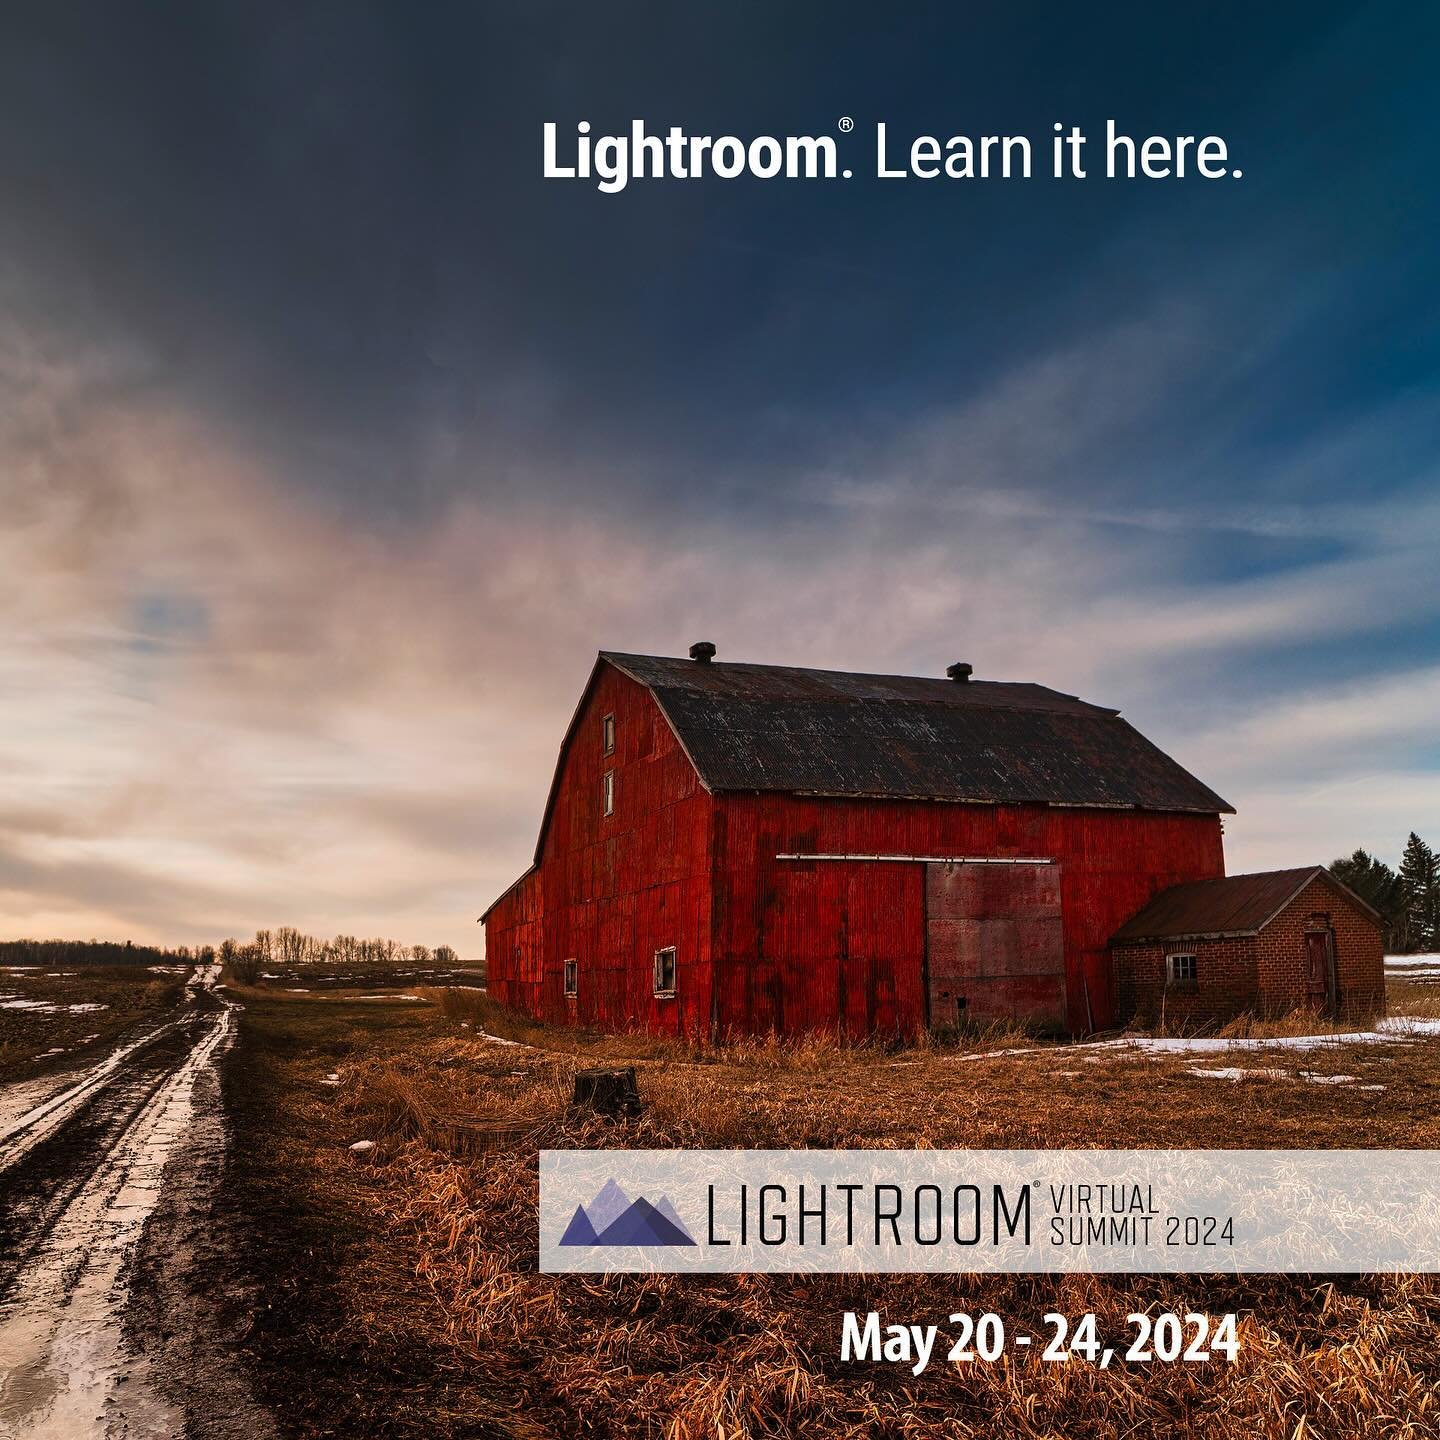 VERY excited to announce that the Lightroom Virtual Summit is returning in 2024 running from May 20th thru May 24th 💥

FREE PASS: https://bit.ly/lvs-2024 *** LINK IN BIO ***

With classes from 15 instructors teaching 45 classes resulting in over 30 